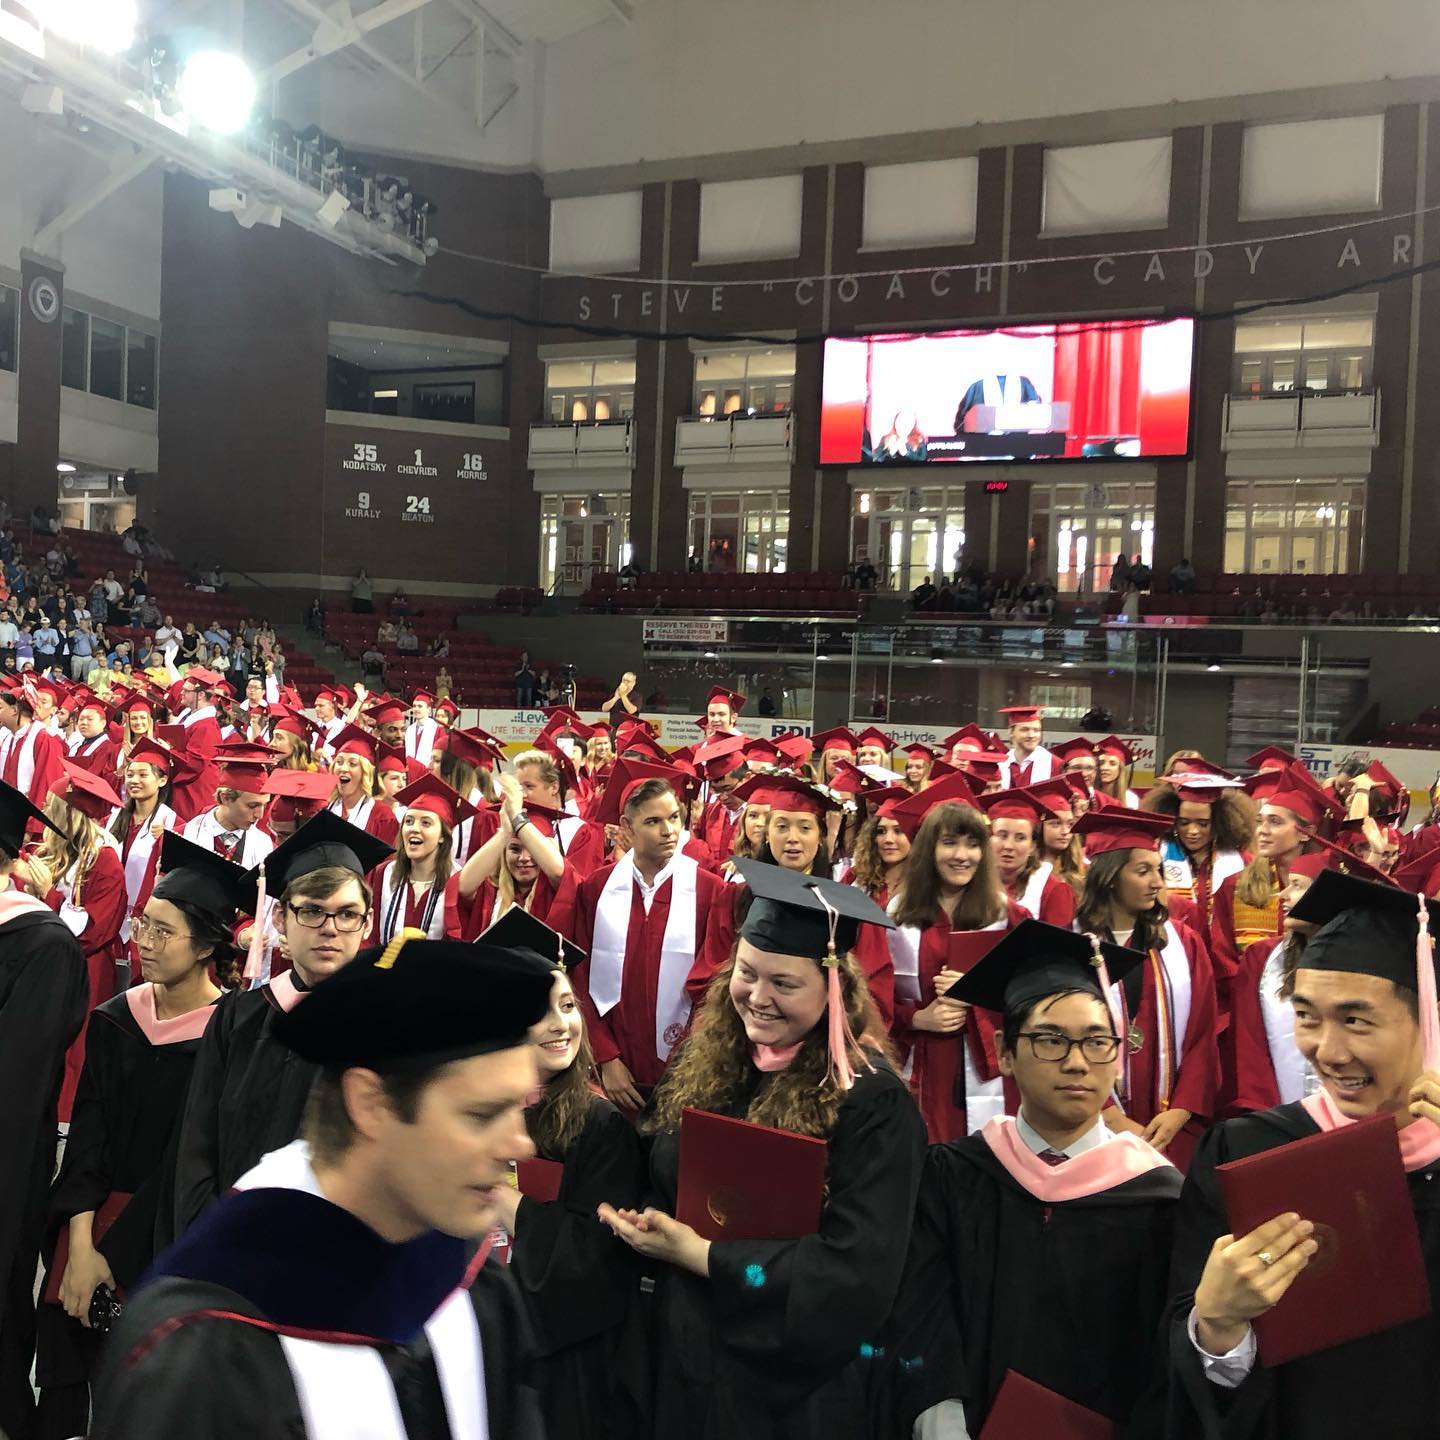 Job perk: I get one of the best seats in the house for Commencement. Congrats @miamiohcca class of 2019! @miamiuniversity